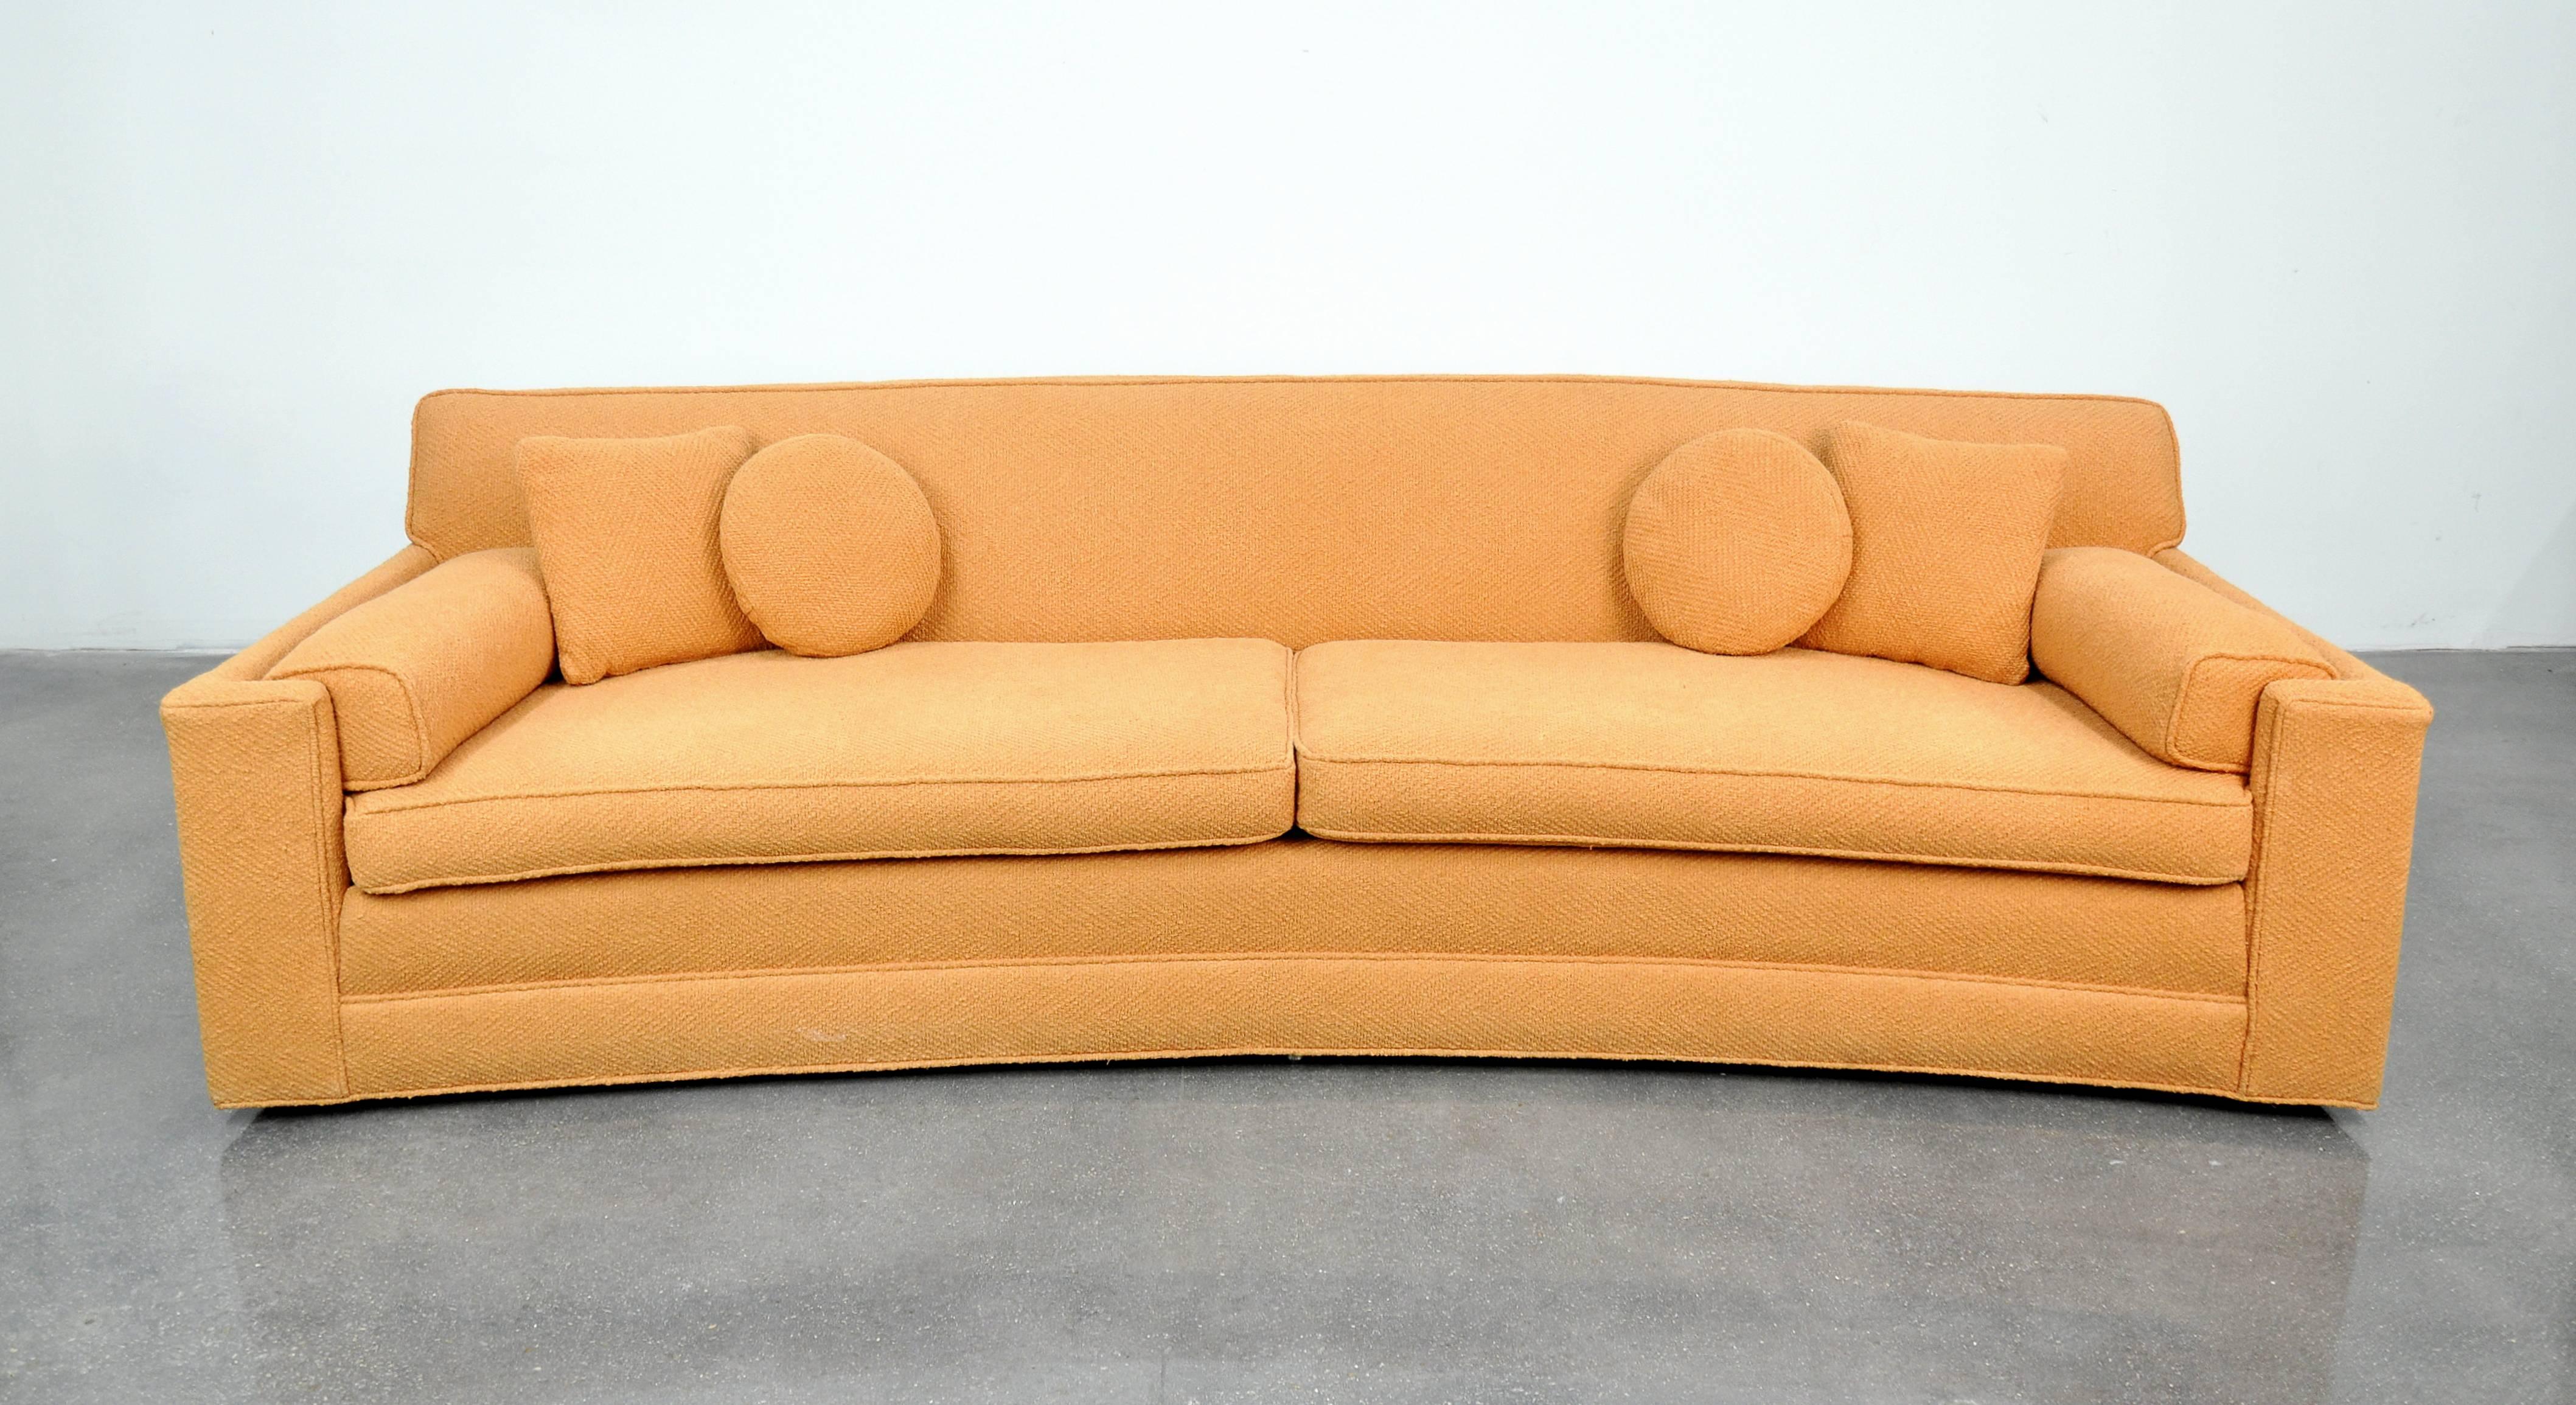 A unique vintage Mid-Century Modern pastel coral sofa attributed to Harvey Probber, and dating from the 1950s. The salmon couch features a crescent shape with angular armrests and low profile casters. The curvilinear light peach orange sofa has